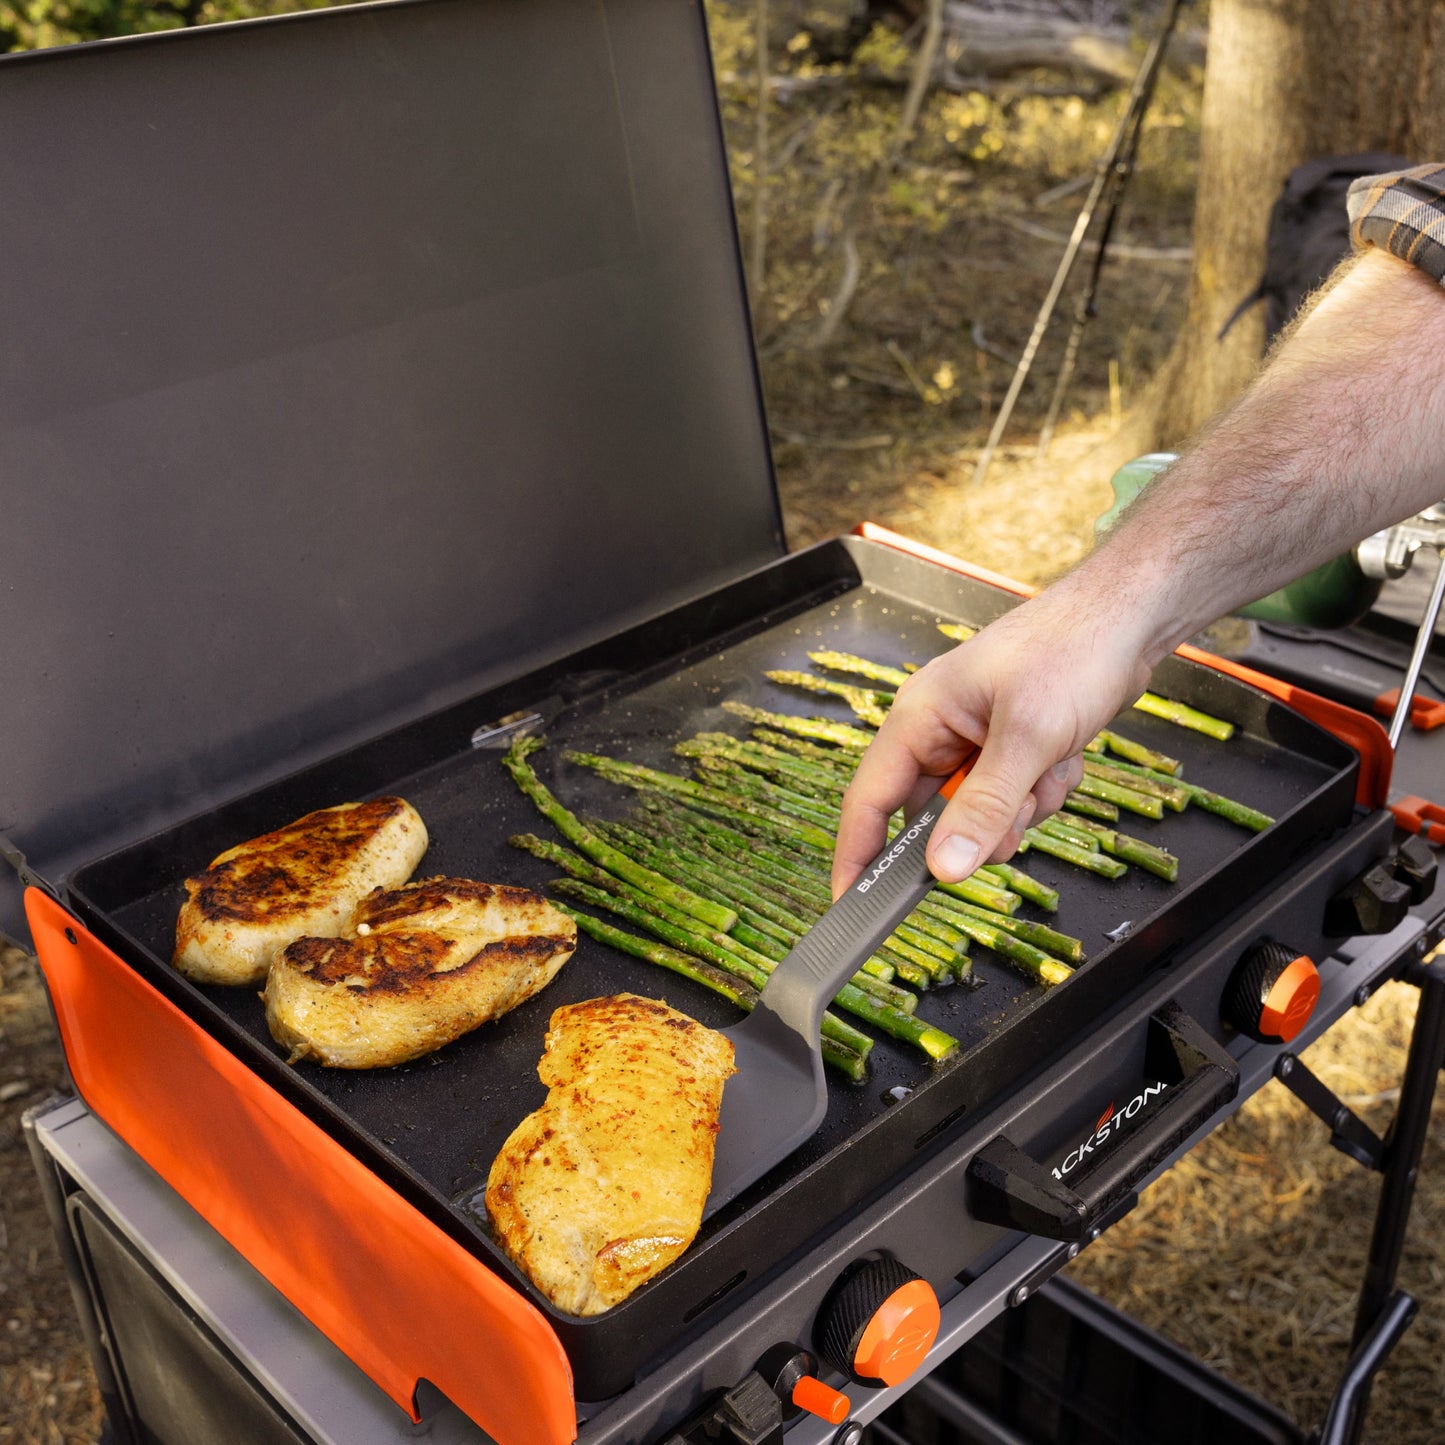 Blackstone Adventure Ready 20"x14" 2-Burner Propane Camping Griddle (Model 2246) with Latching Hood and Handle